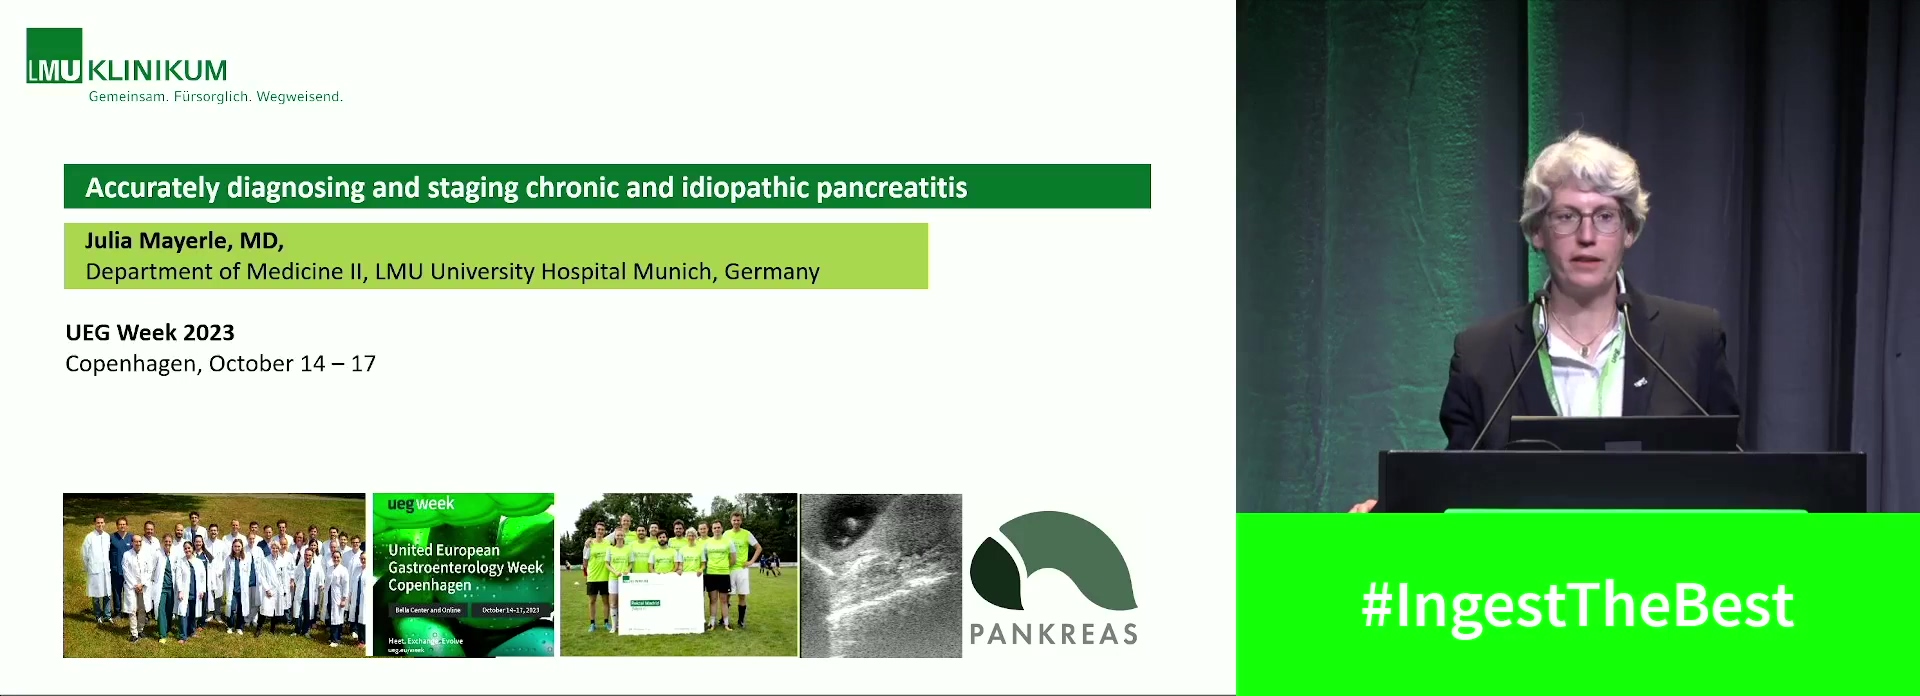 Accurately diagnosing and staging chronic and idiopathic pancreatitis